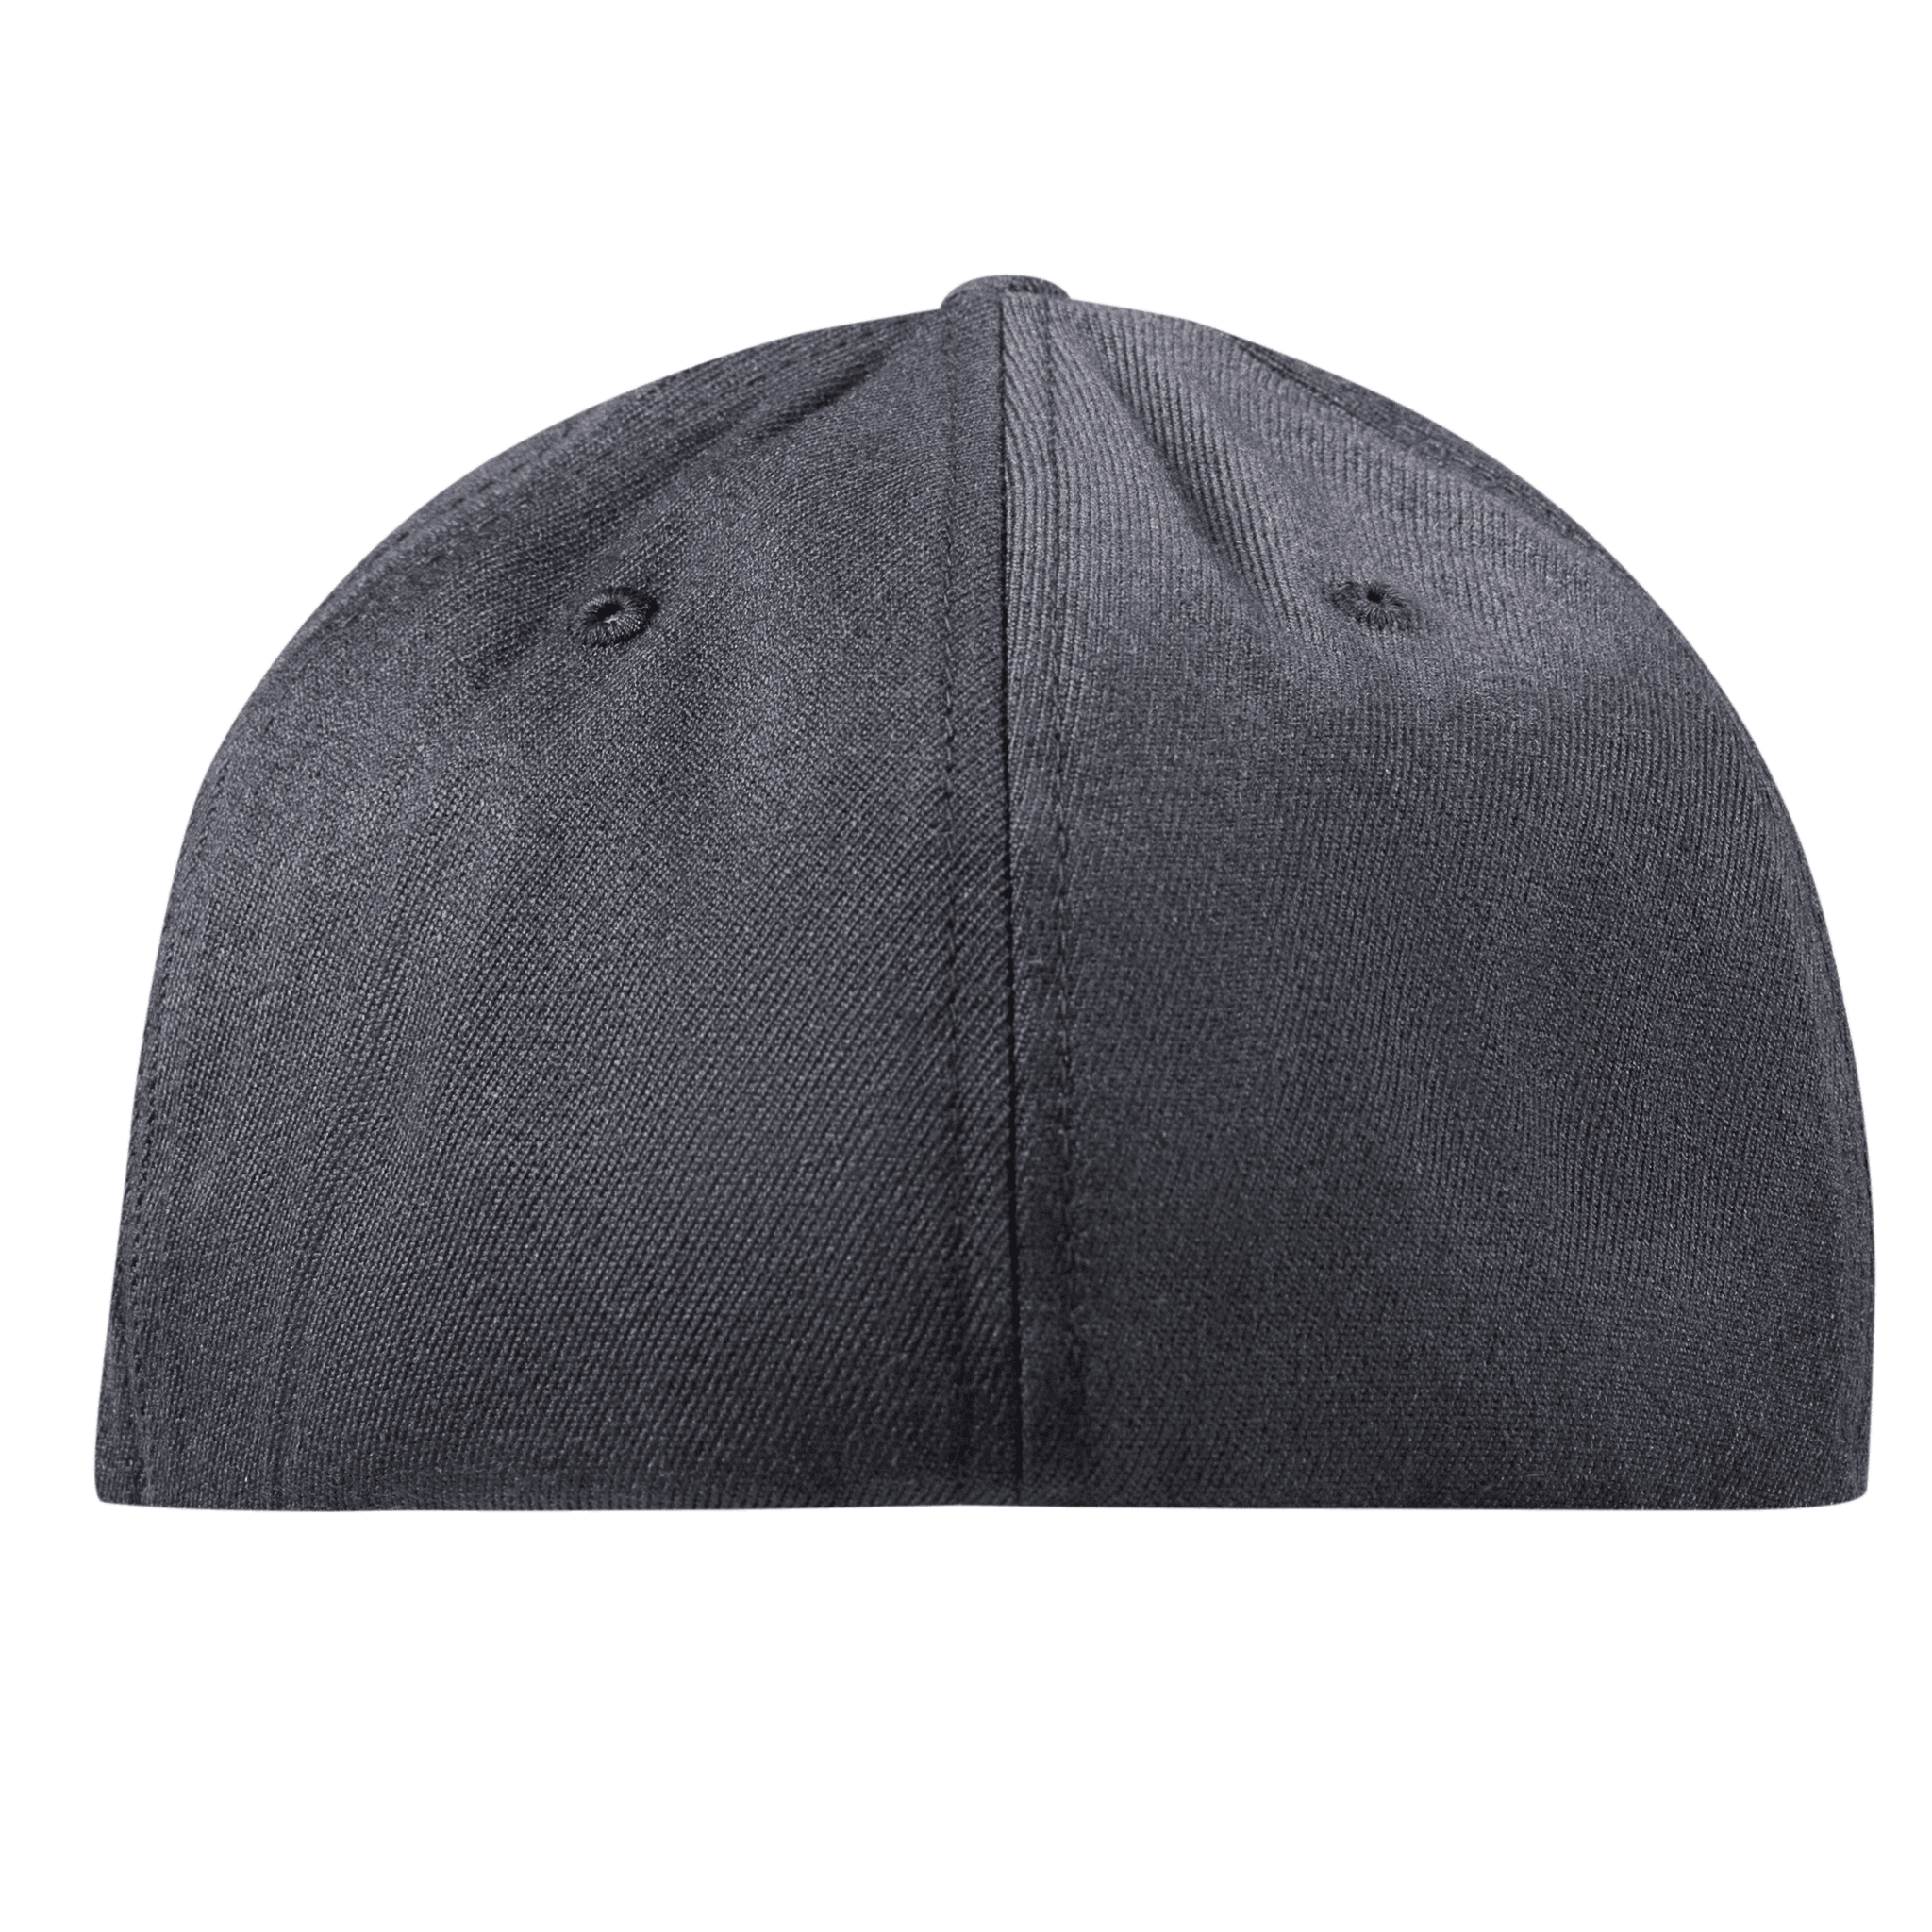 New Mexico 47 Midnight Flexfit Fitted Back Charcoal